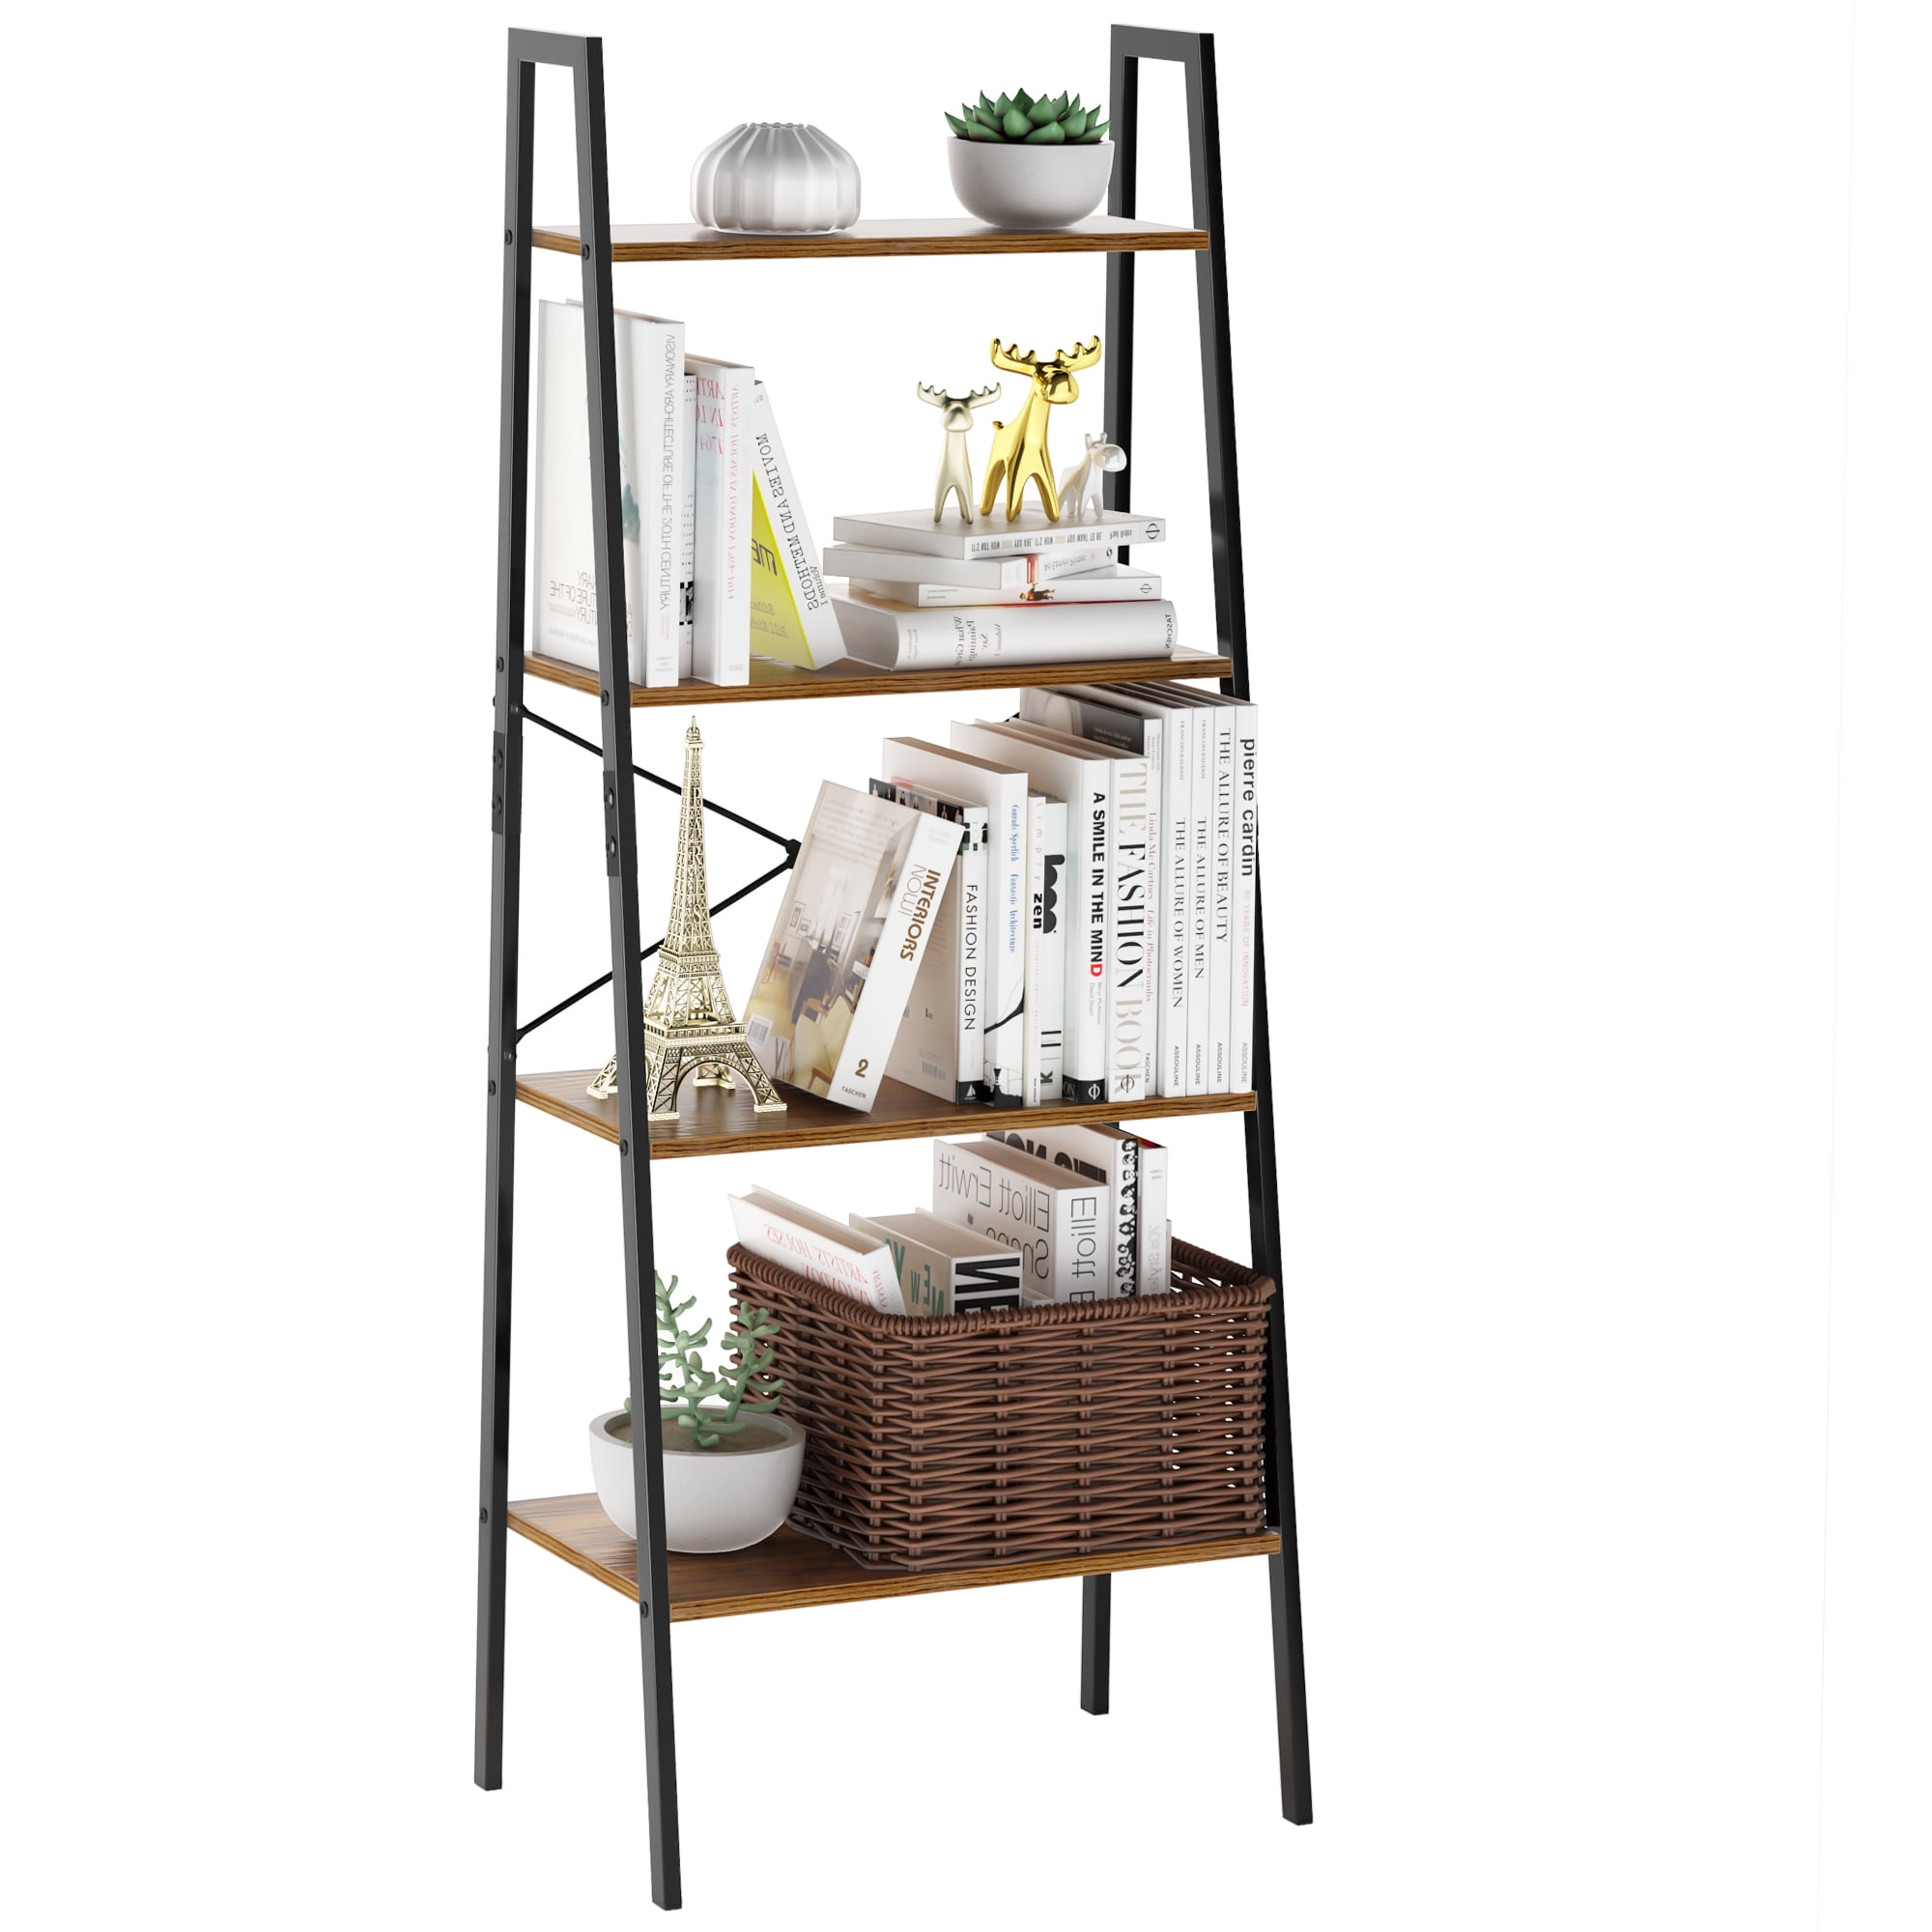 AllRight 4 Tiers Ladder Book Shelf Wooden Bookcase Home Decor Storage Unit Standing Shelves 4 Tiers White